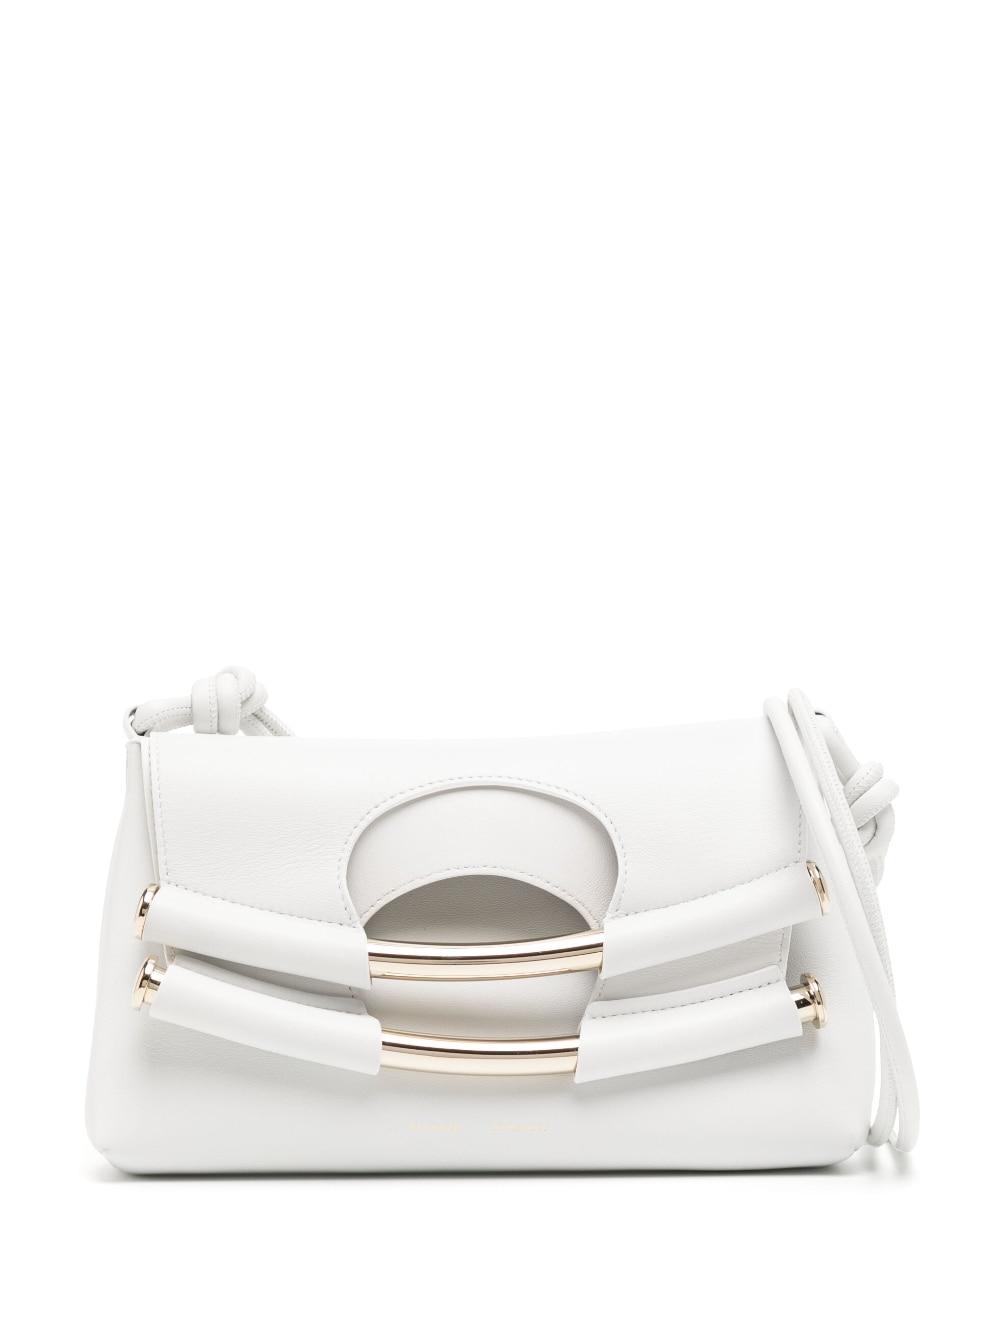 Proenza Schouler Small Bar Crossbody Leather Bag in White | Lyst